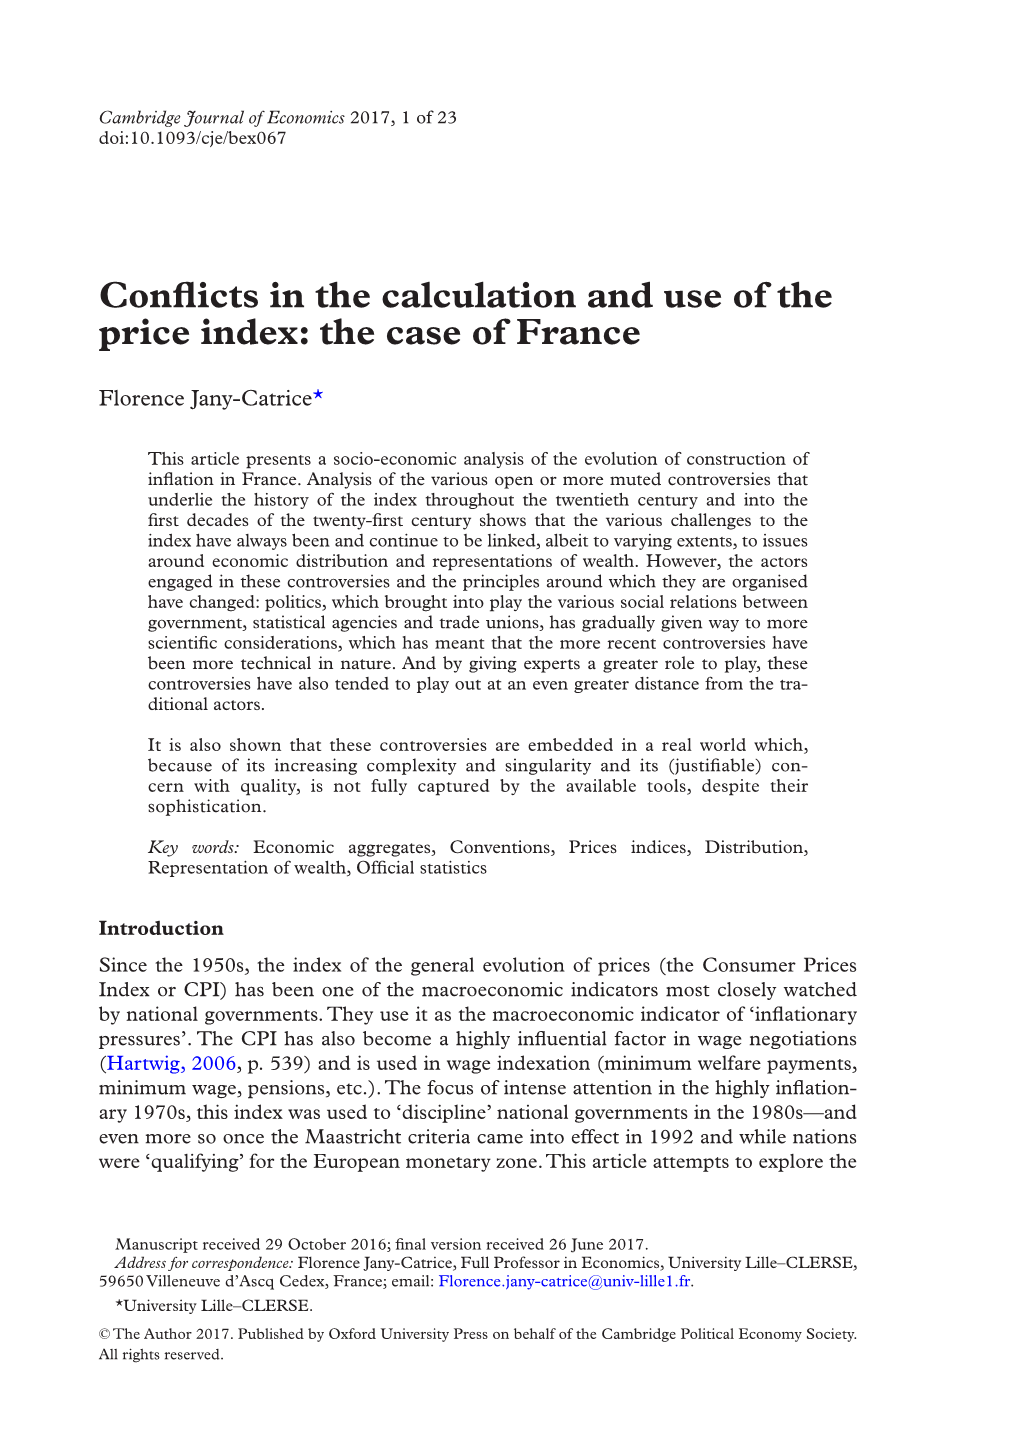 Conflicts in the Calculation and Use of the Price Index: the Case of France